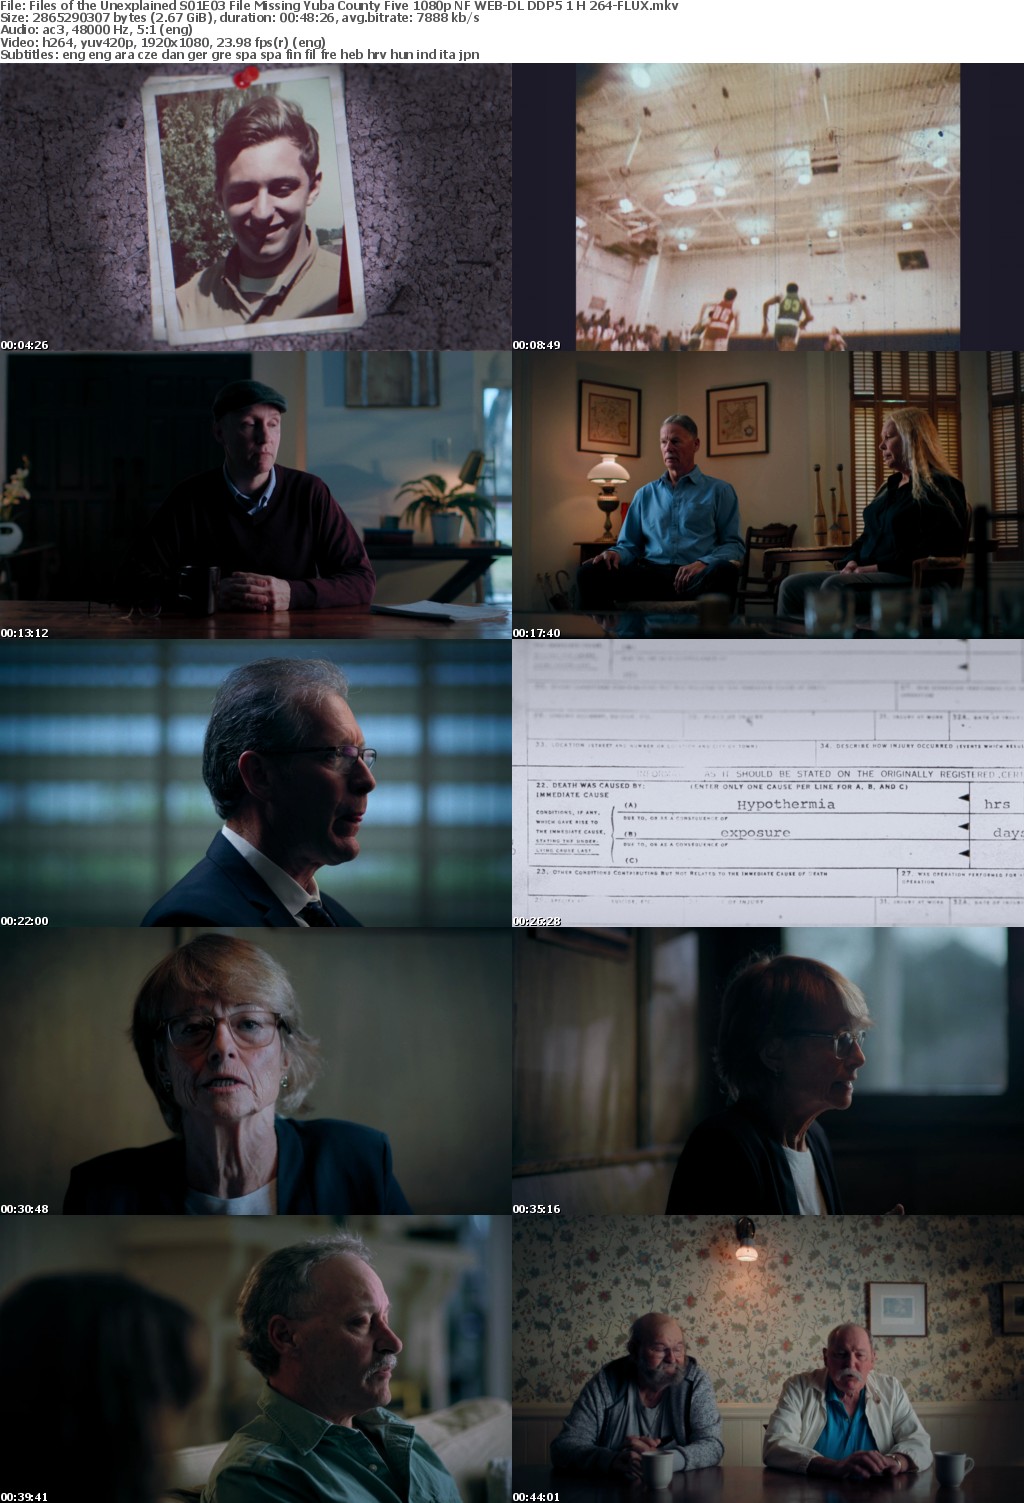 Files of the Unexplained S01E03 File Missing Yuba County Five 1080p NF WEB-DL DDP5 1 H 264-FLUX